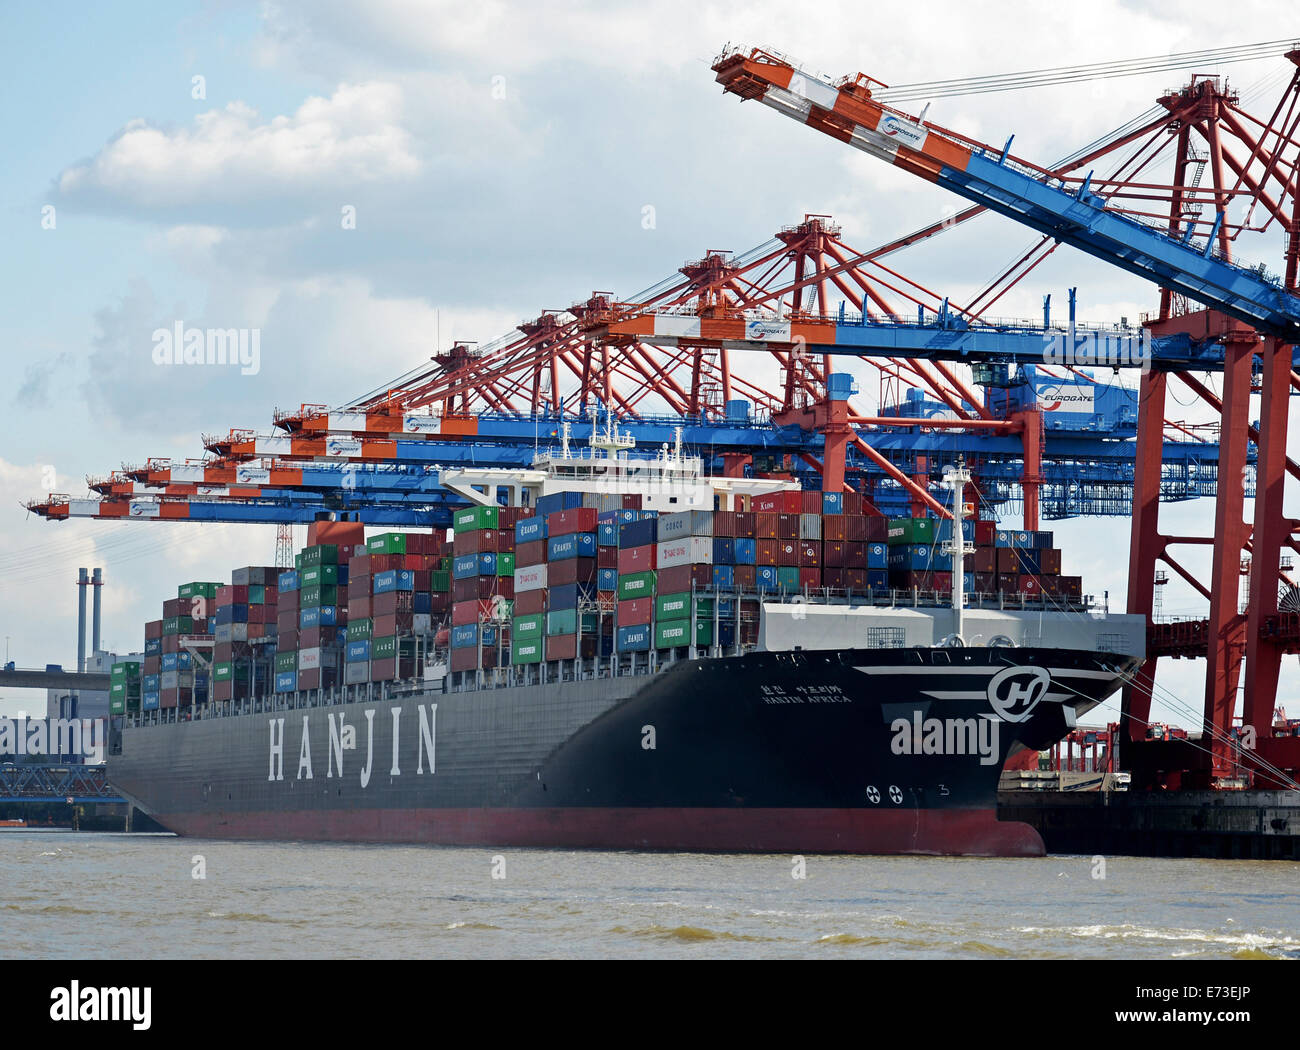 The container ship Hanjin Africa docks in the port of Hamburg, 27 August 2014. Stock Photo